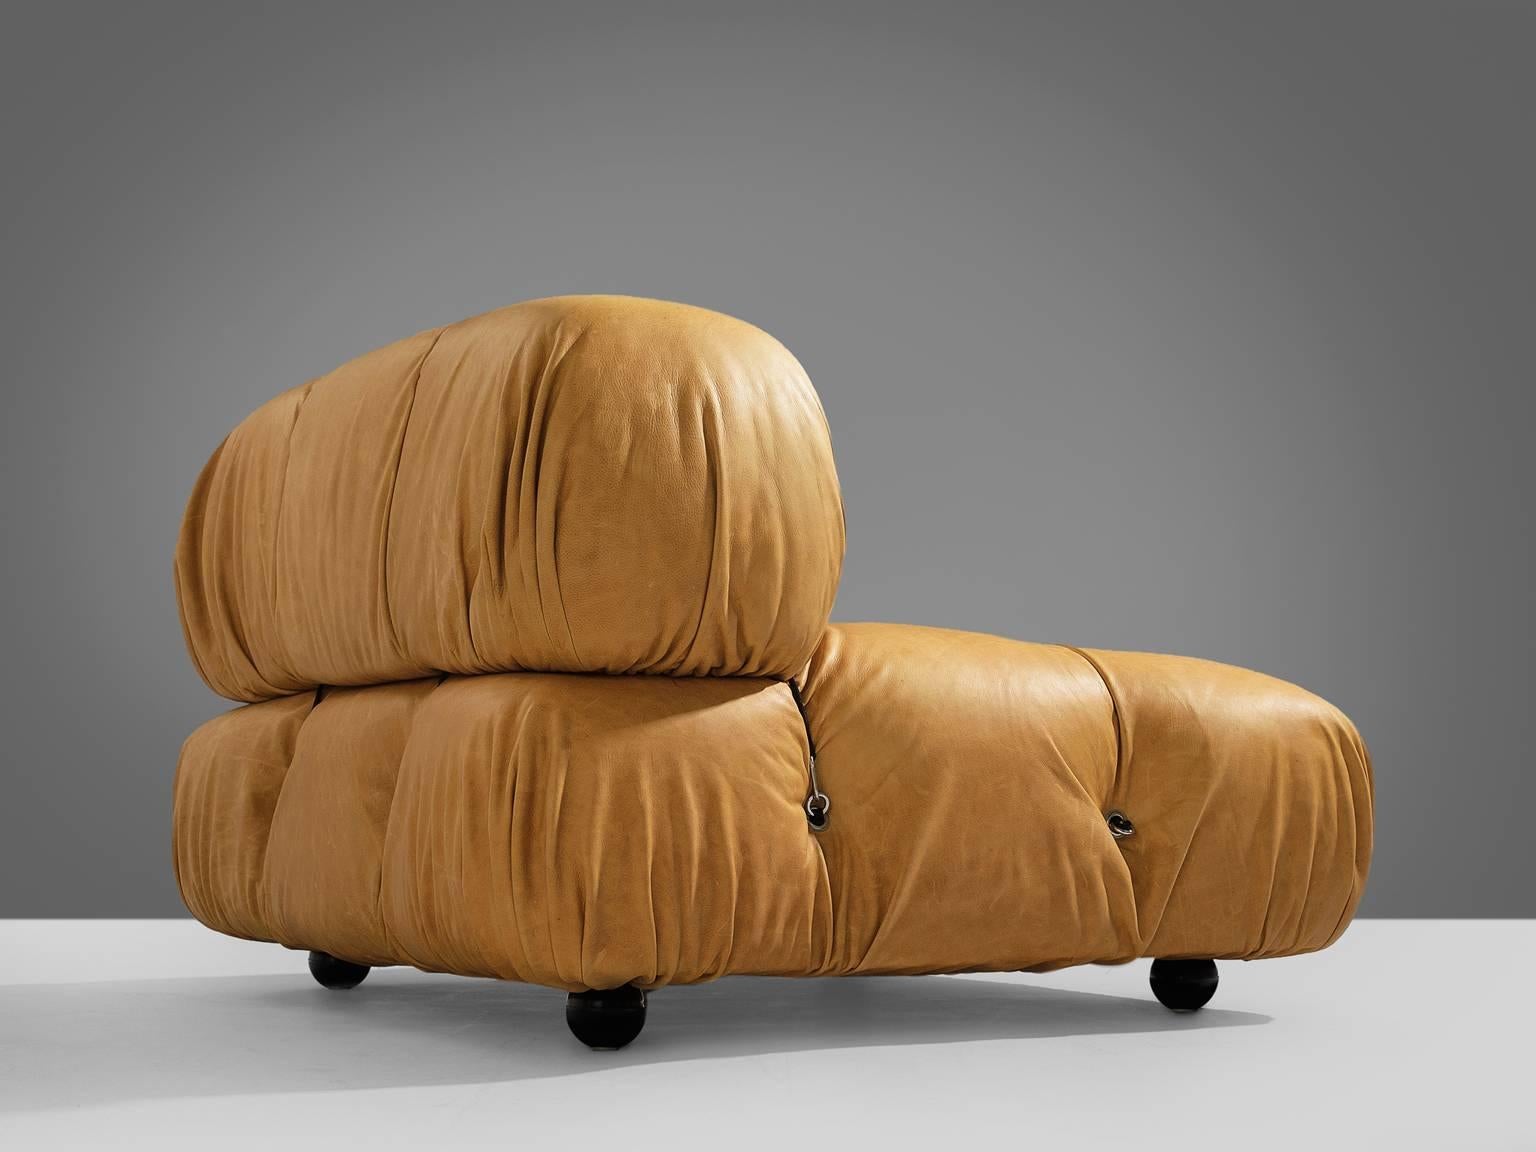 Mario Bellini, large modular 'Cameleonda' sofa, cognac leather upholstery, Italy, 1971, reupholstered in approved leather by our in-house upholstery atelier, configuration:

- 5 large base
- 3 large backs
- 2 arm rests
- 2 small base
- 1 small back

